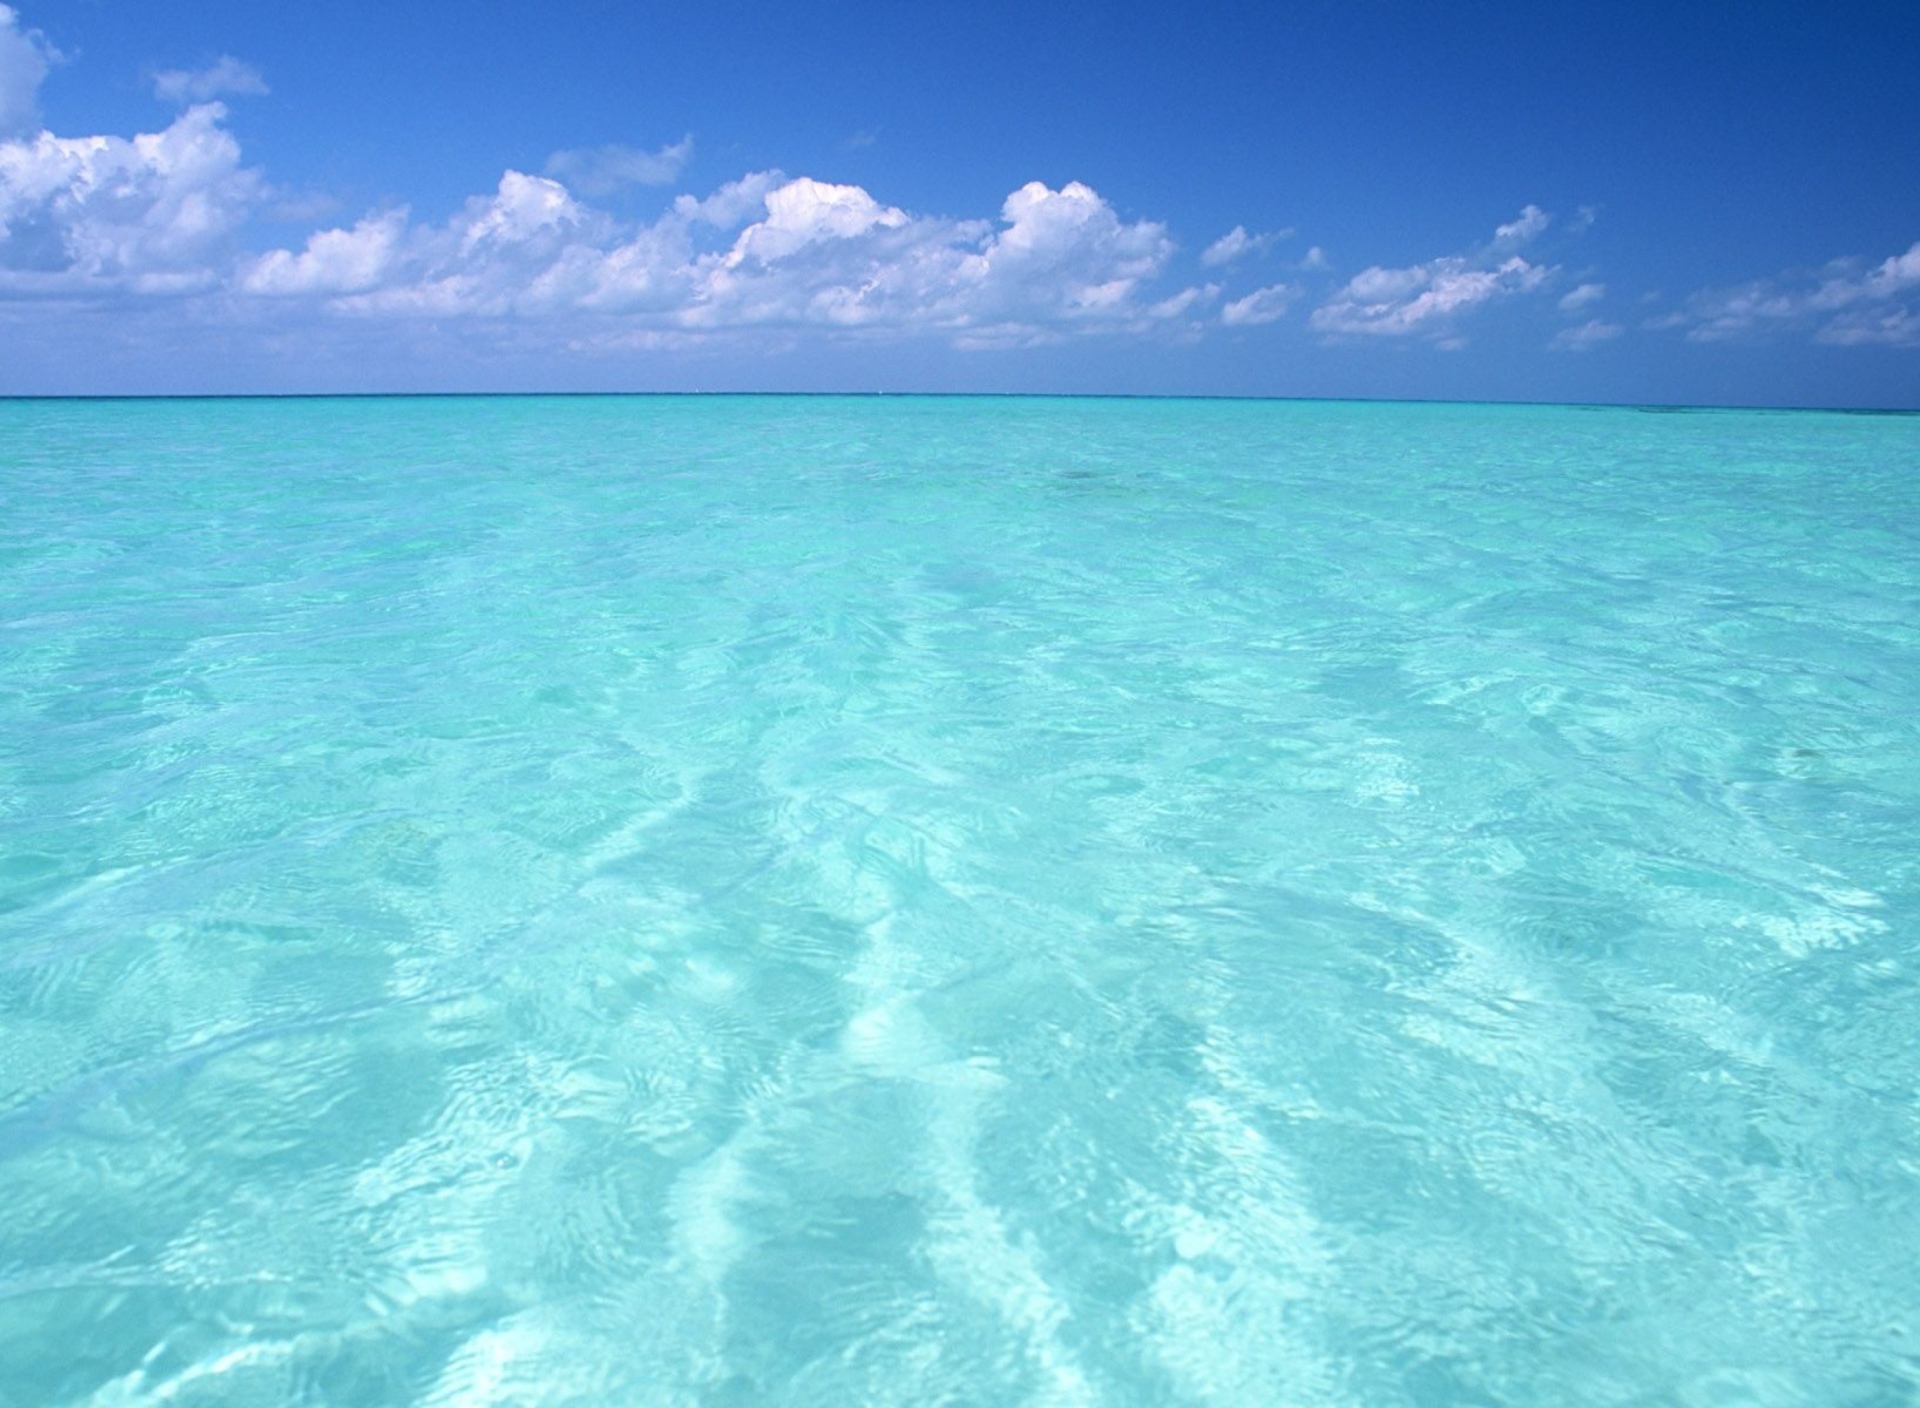 Teal Water And Blue Sky wallpaper 1920x1408